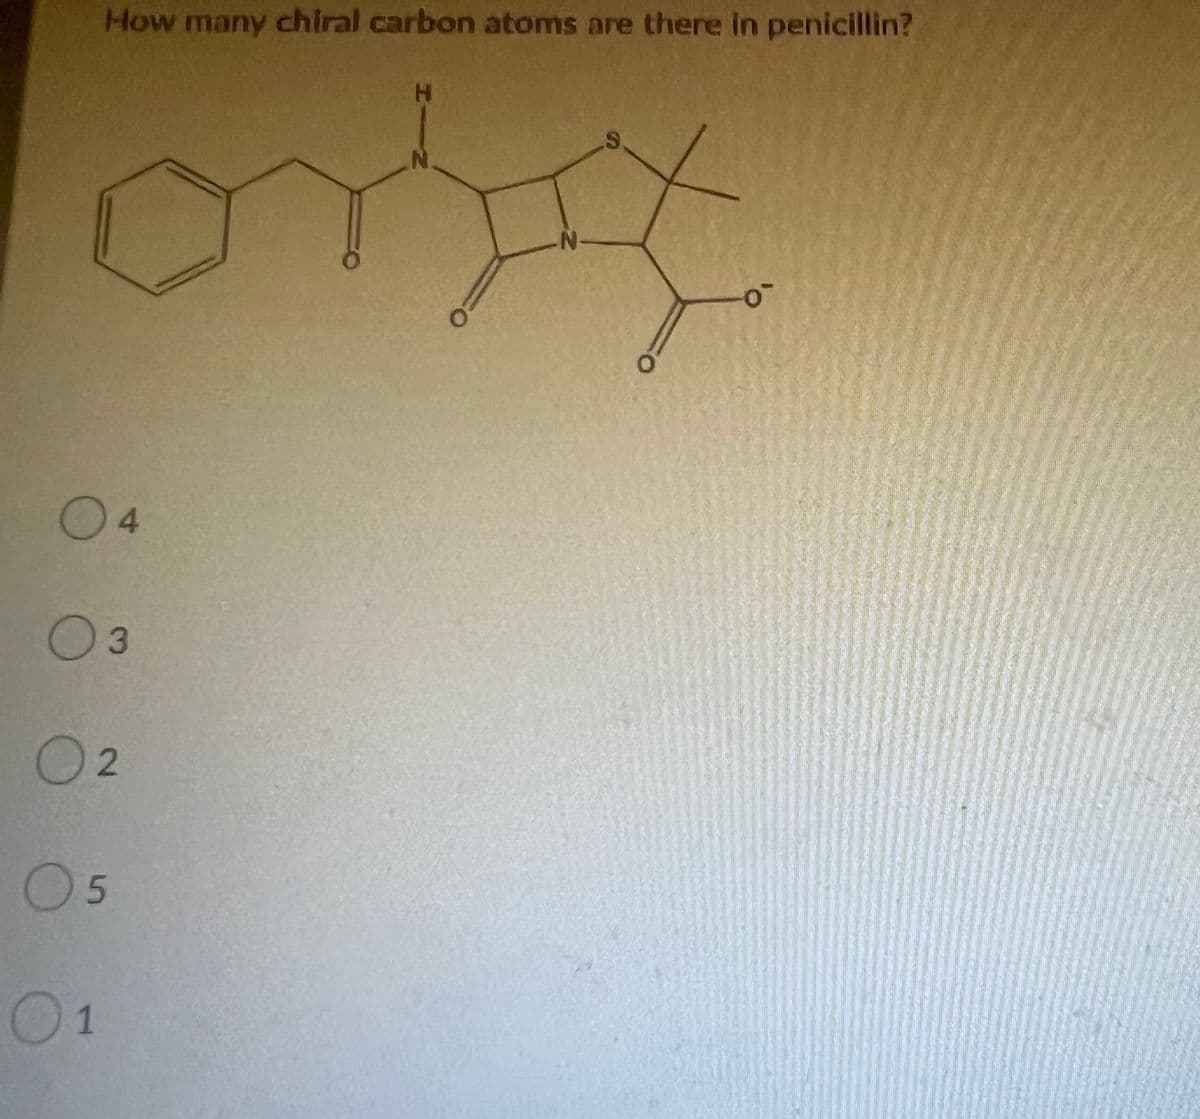 How many chiral carbon atoms are there in penicillin?
H
S
onst
N-
04
03
02
05
01